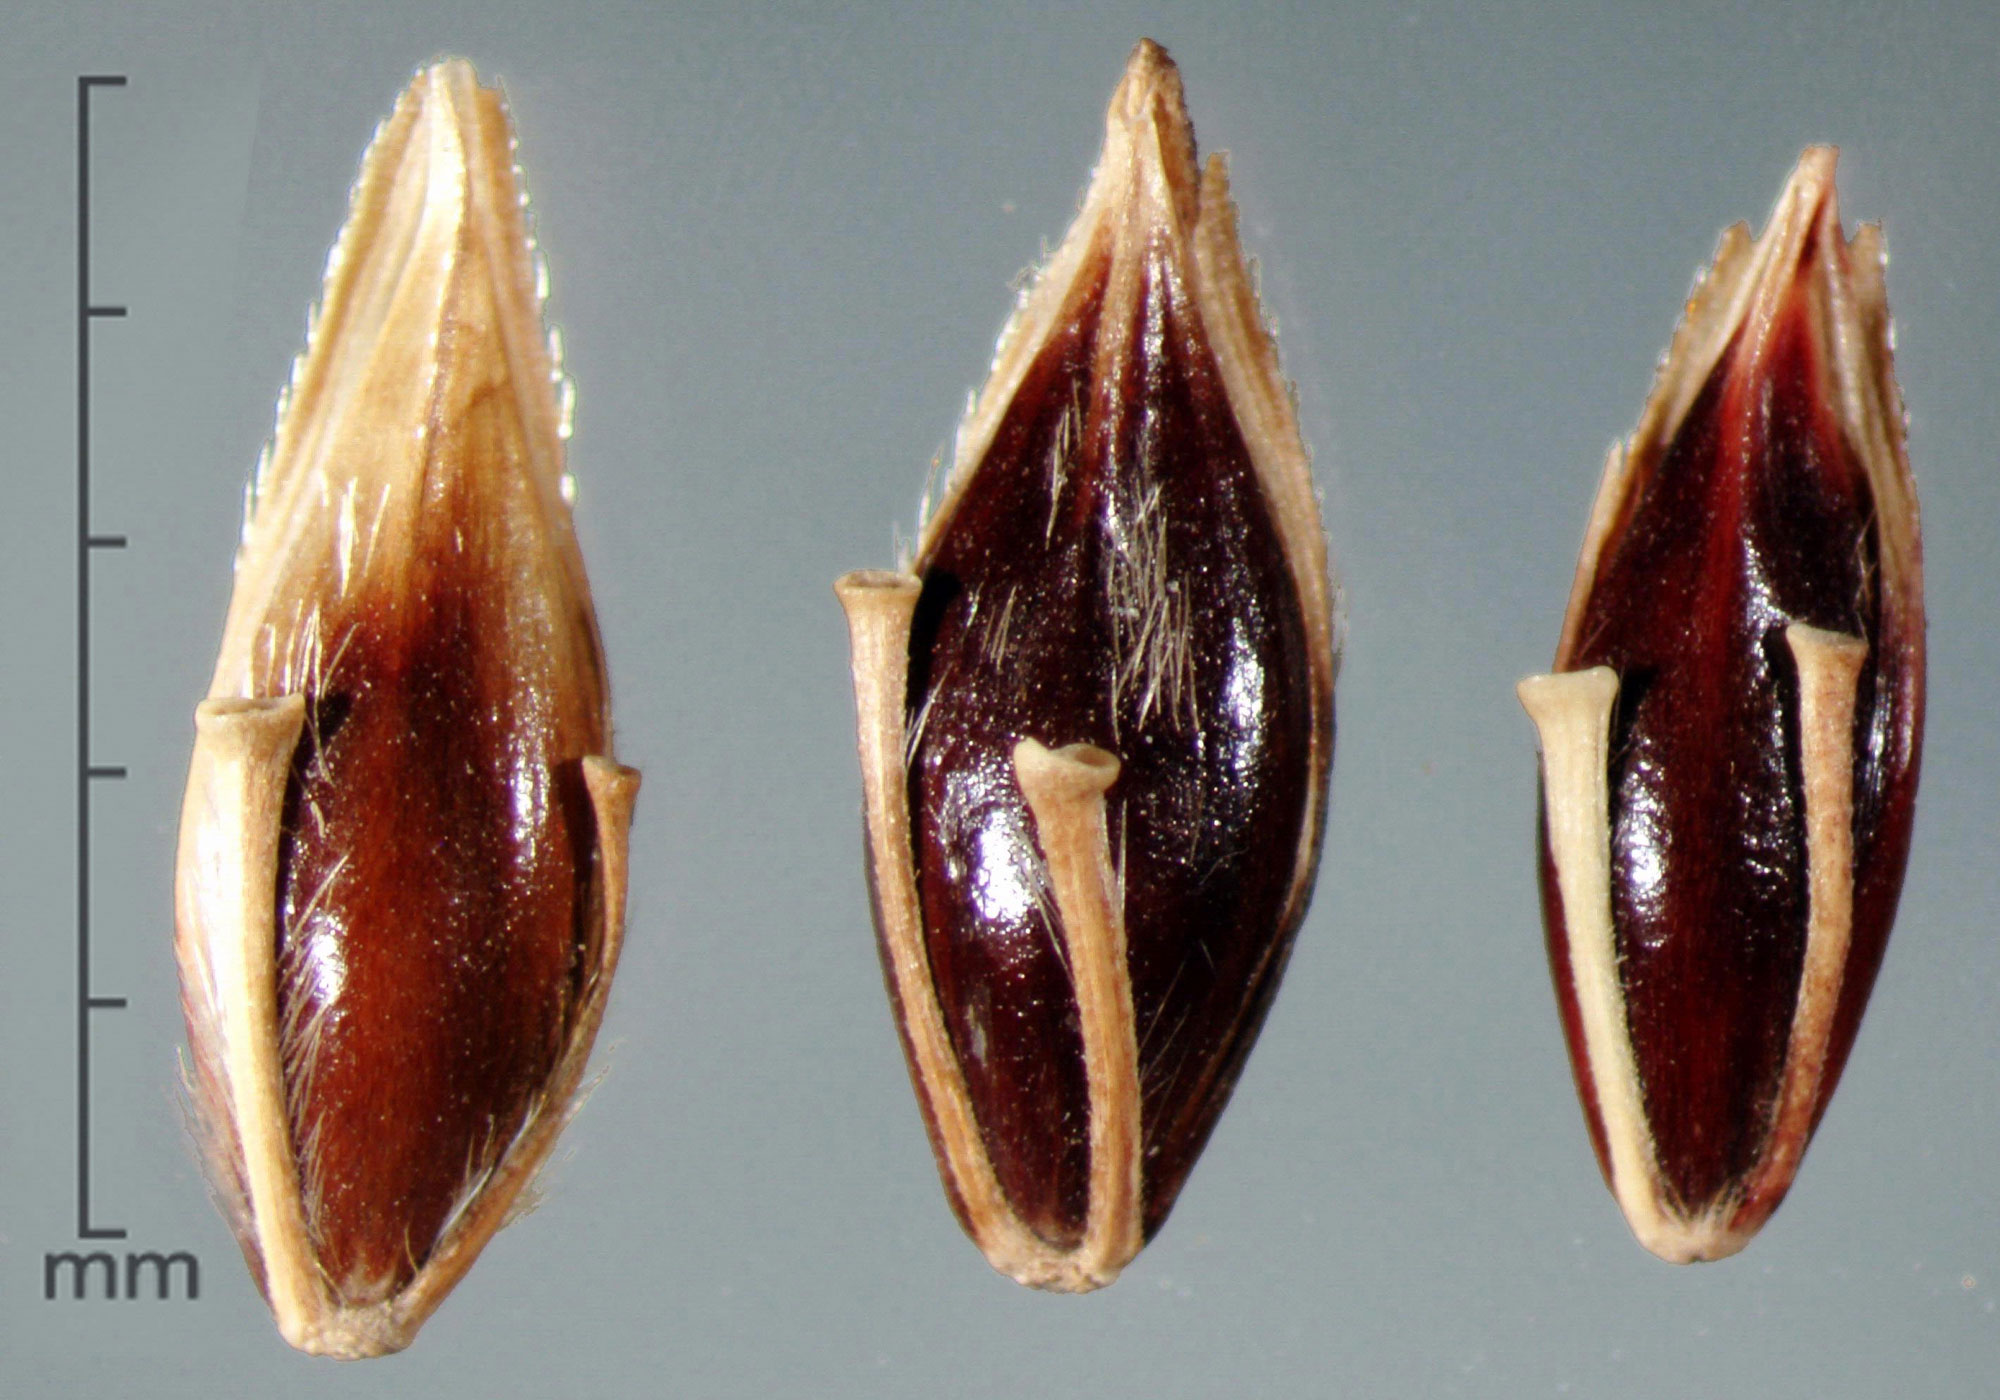 Photograph showing three spikelets of Johnsongrass. Each of the spikelets is ovoid (egg-shaped) with a pointed tip and is shiny and brown in color. The spikelets are about 5 millimeters long.